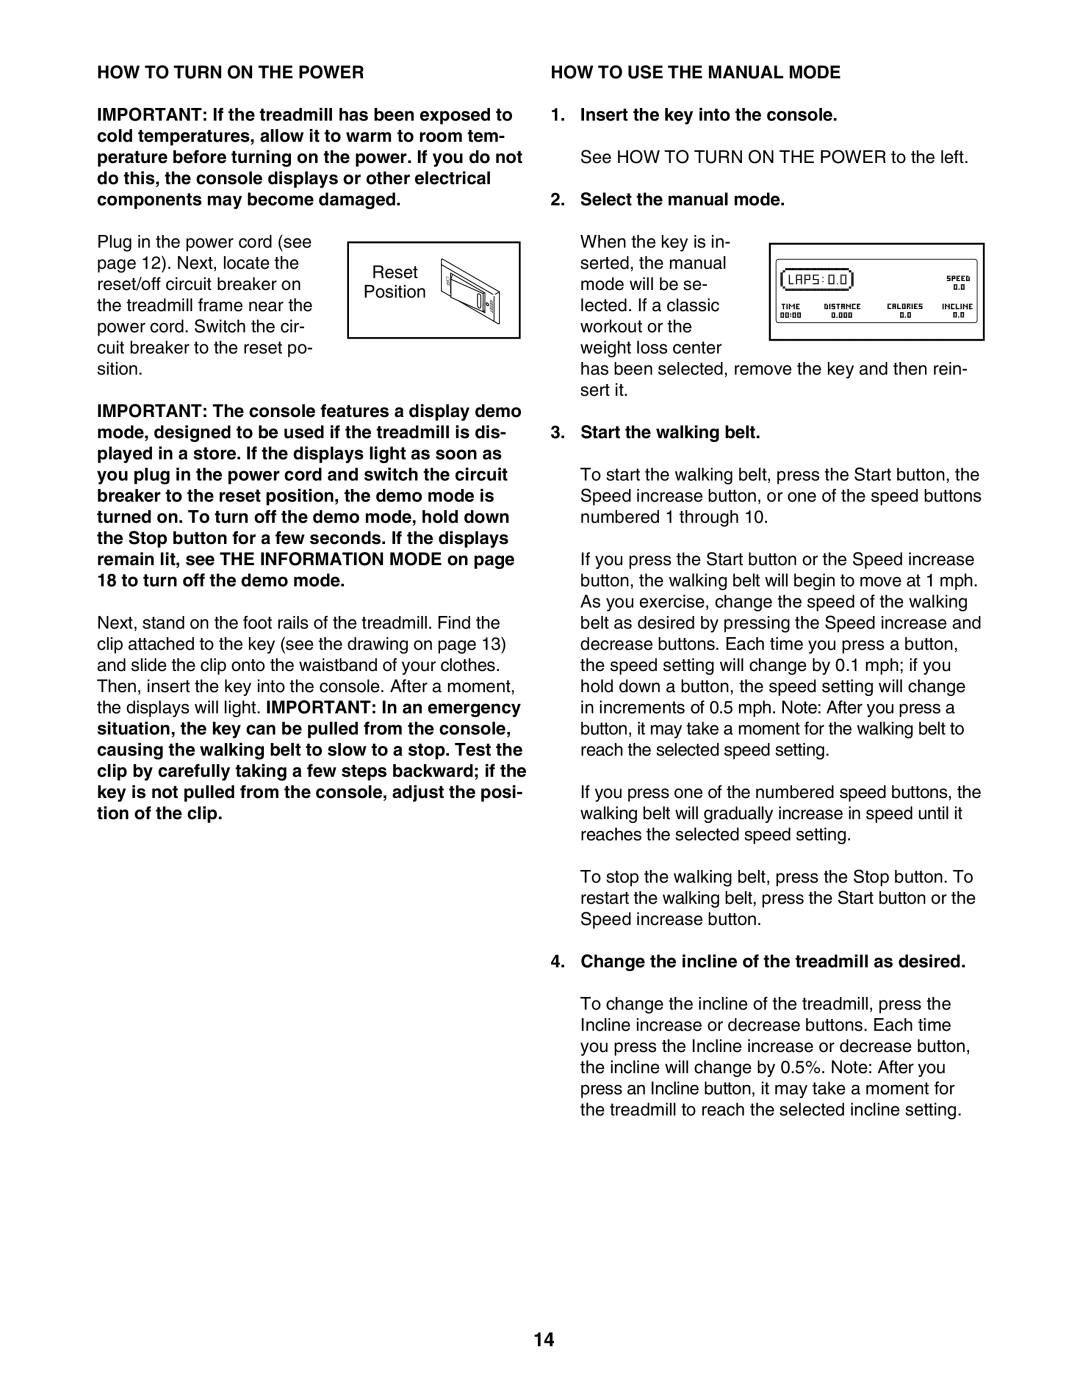 ProForm 620 user manual HOW to Turn on the Power, HOW to USE the Manual Mode 